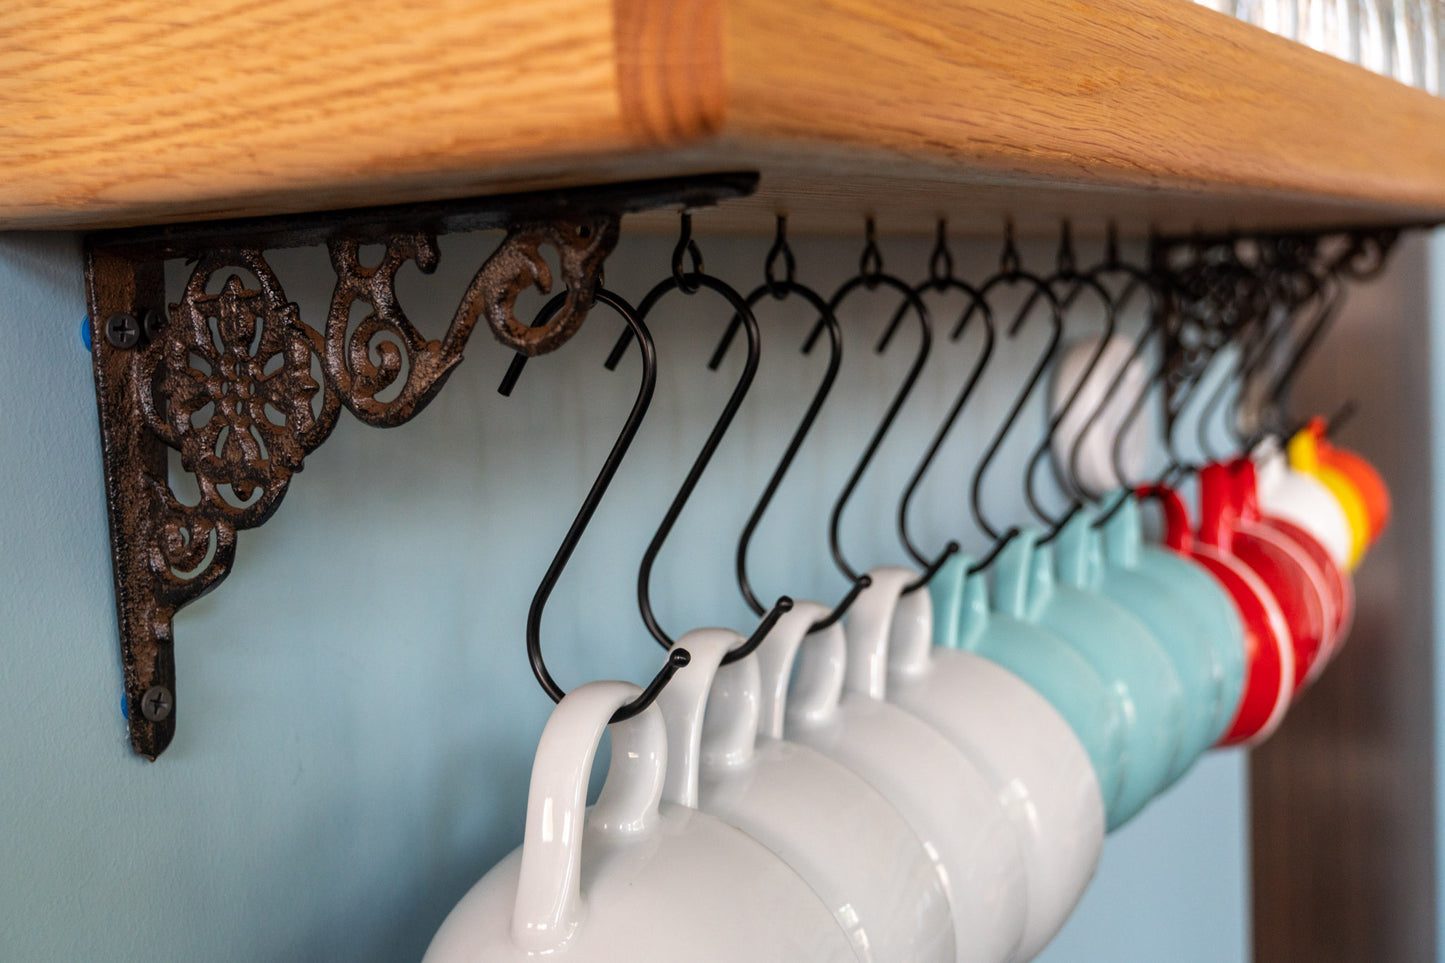 An intricately designed cast-iron bracket holds an oak shelf and is wall mounted to a blue wall. S-shaped metal hooks are attached to the bottom of the shelf and hold a variety of coffee mugs in white, blue, red, yellow, and orange colors.